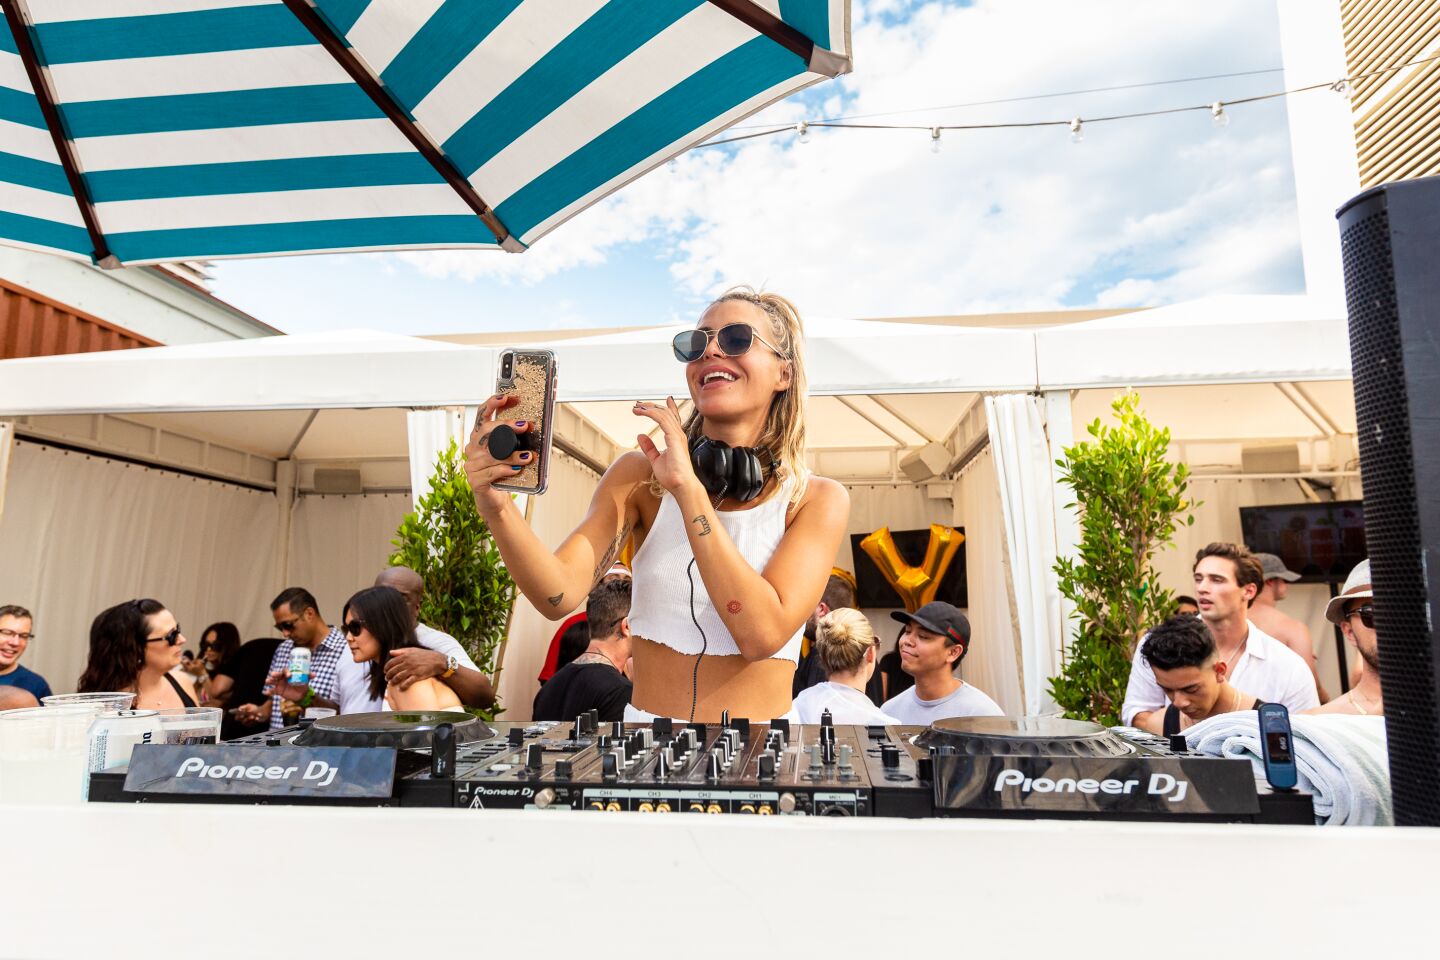 DJ Sam Blacky showed her hometown some love during a set at The Pool House on Sunday, Sept. 1, 2019.